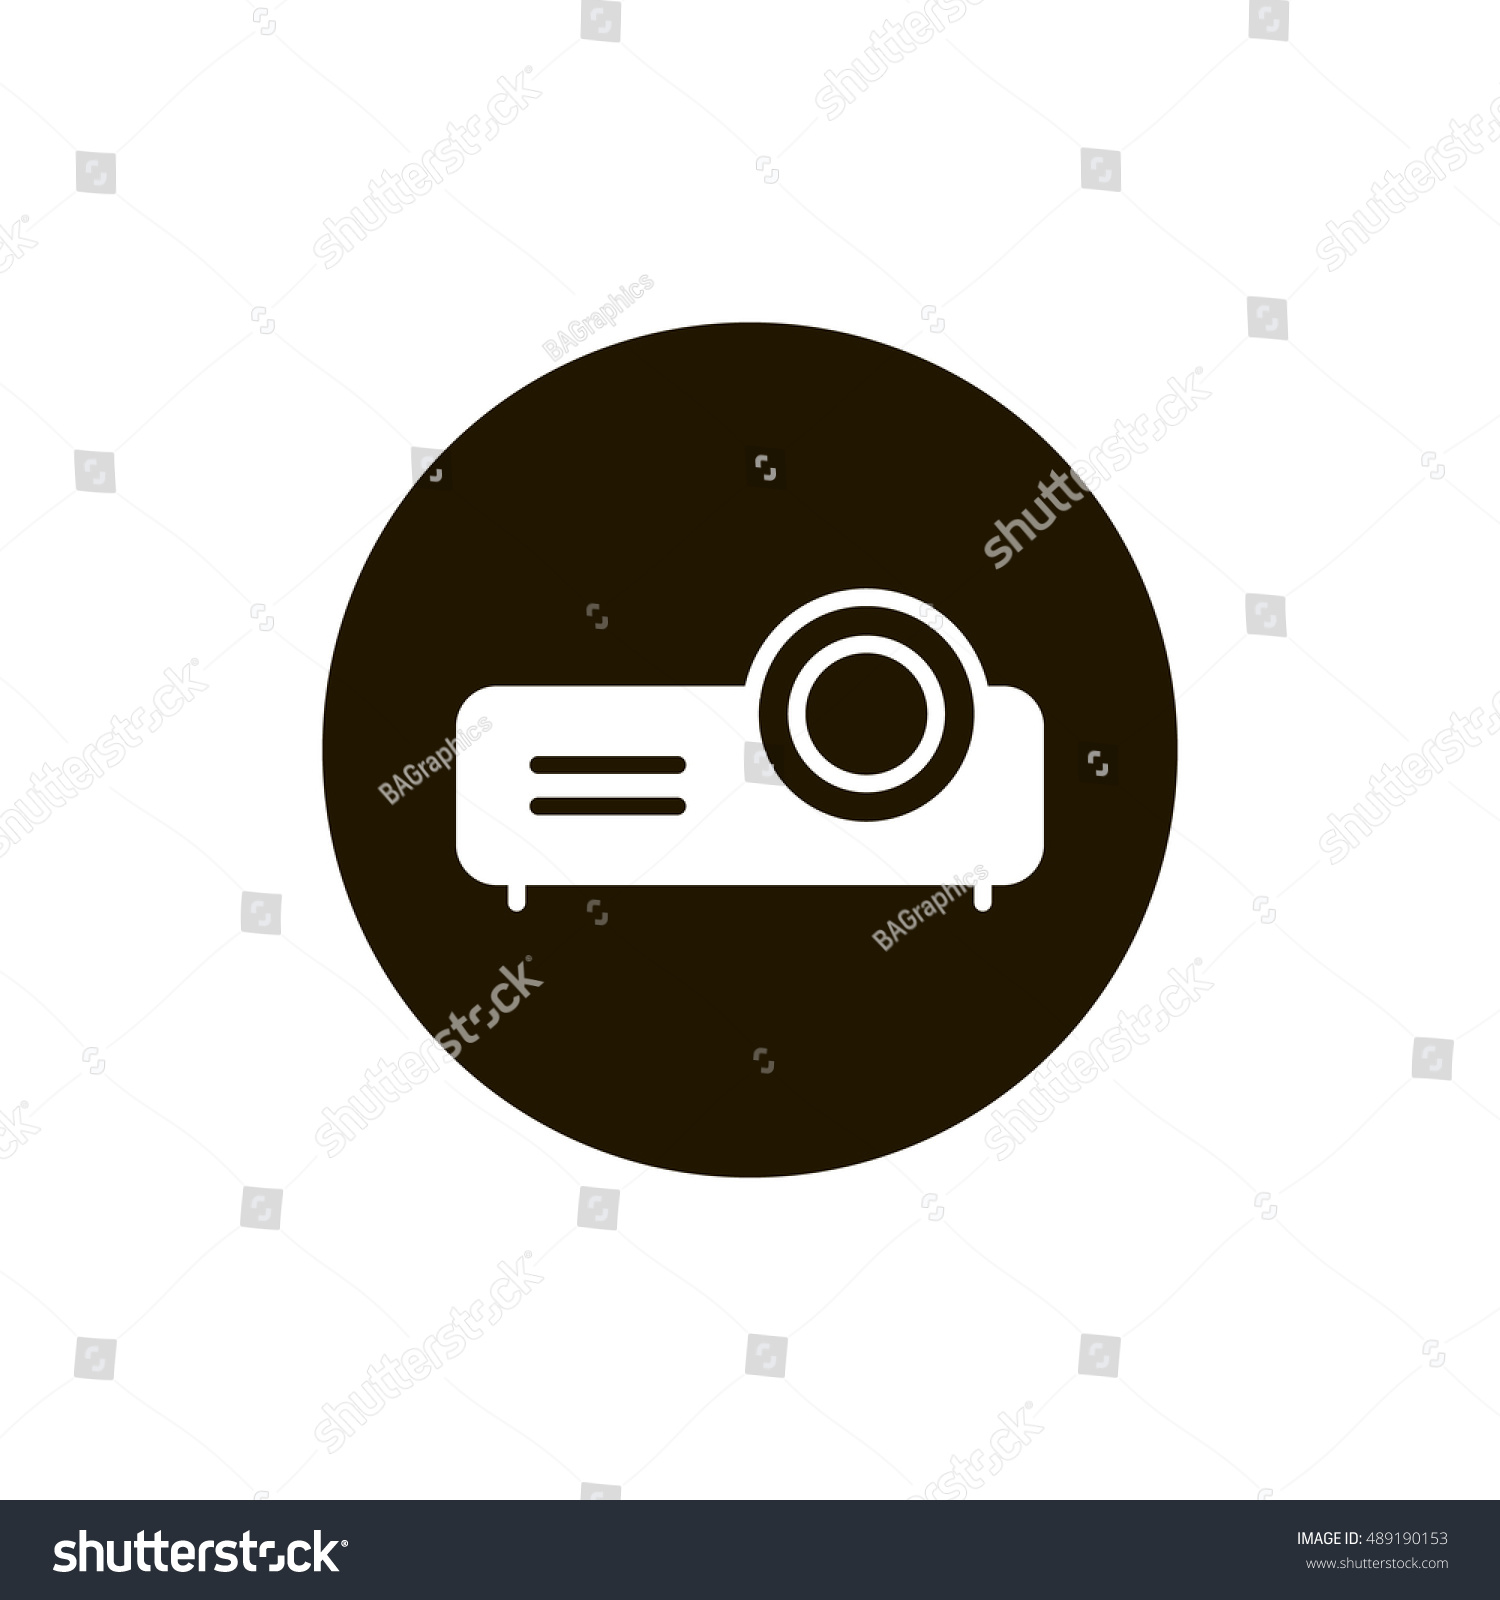 SVG of Projector icon vector, clip art. Also useful as logo, circle app icon, web element, symbol, graphic image, silhouette and illustration. Compatible with ai, cdr, jpg, png, svg, pdf, ico and eps. svg